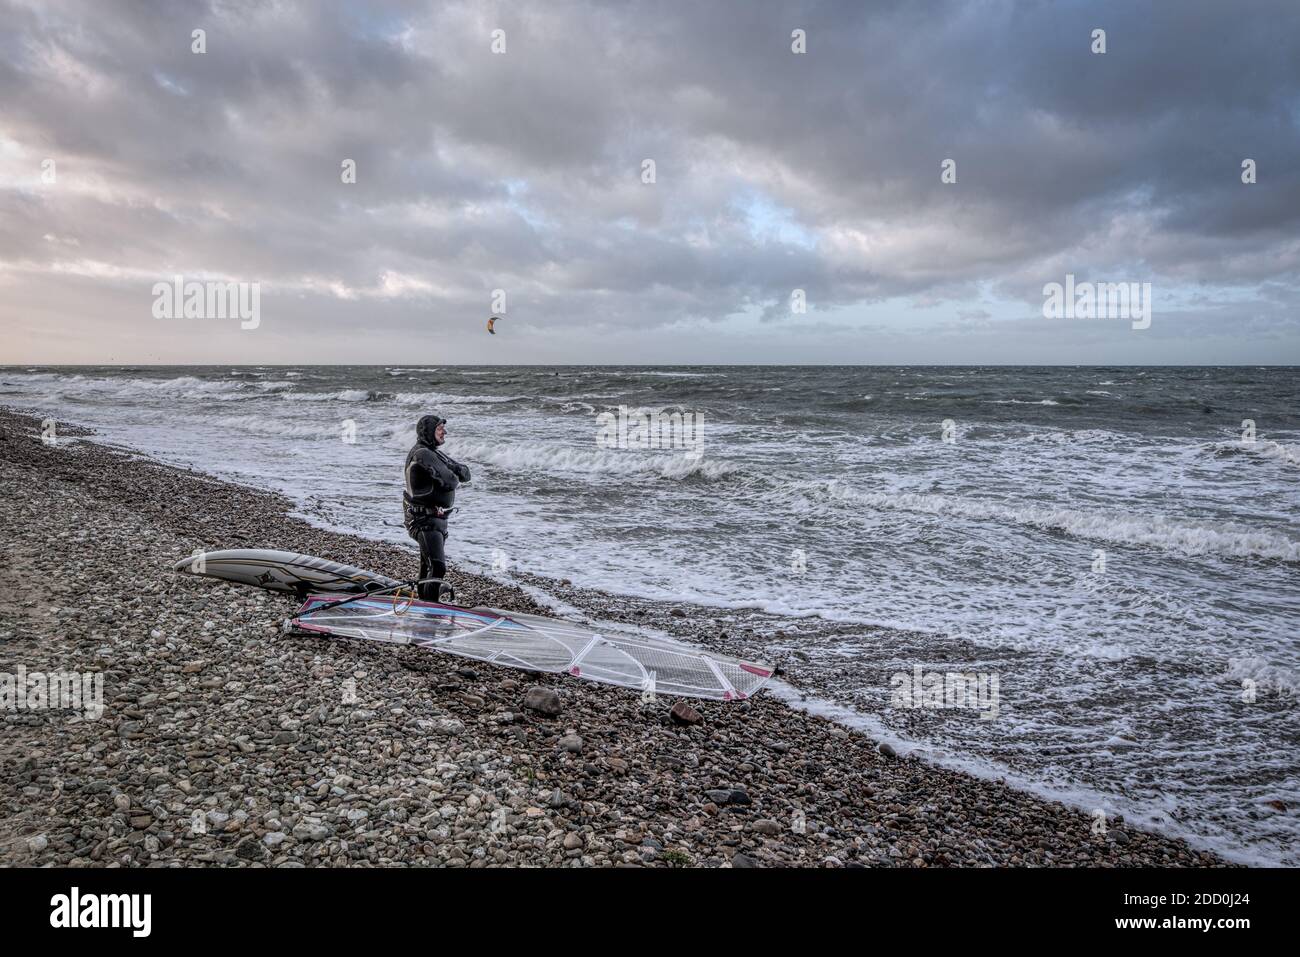 senior windsurfer in black wet suit standing at the shore with his equipment looking at the winter storm over the cold sea, Smidstrup, Denmark, Stock Photo